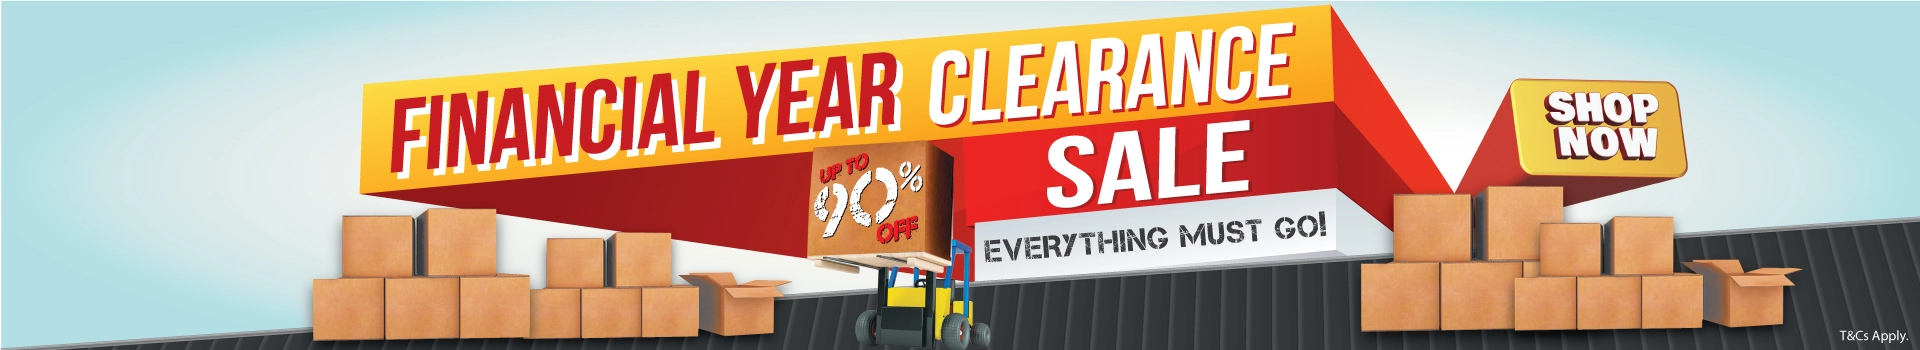 Financial Year Clearance Sale